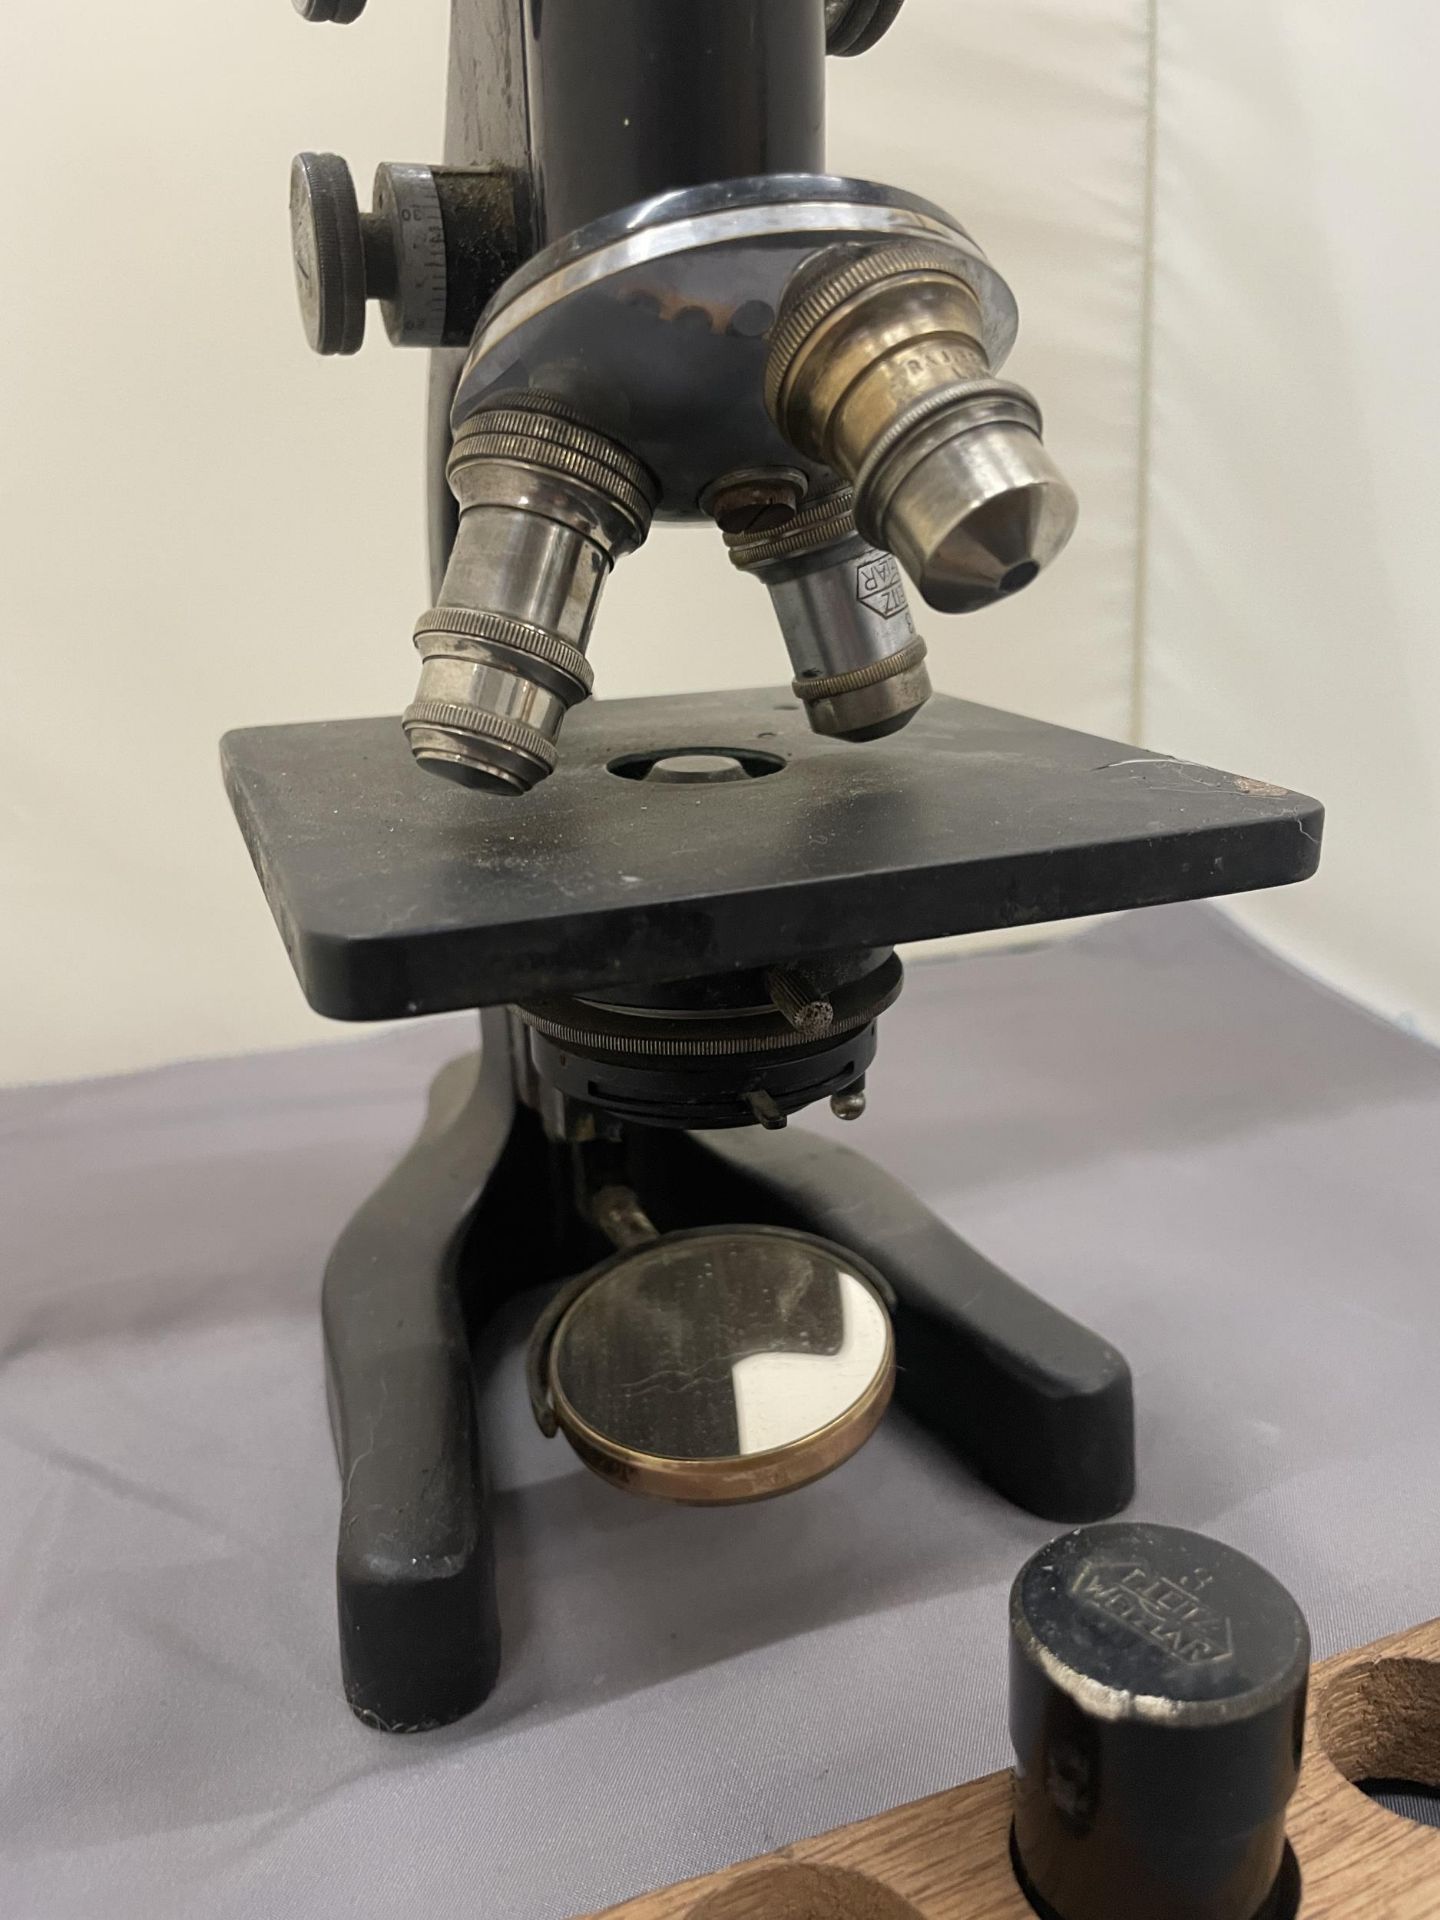 AN ERNST LEITZ WETZLAR MICROSCOPE, NO. 324603, WITH WOOD TRAY AND SPARE LENS - Image 3 of 3